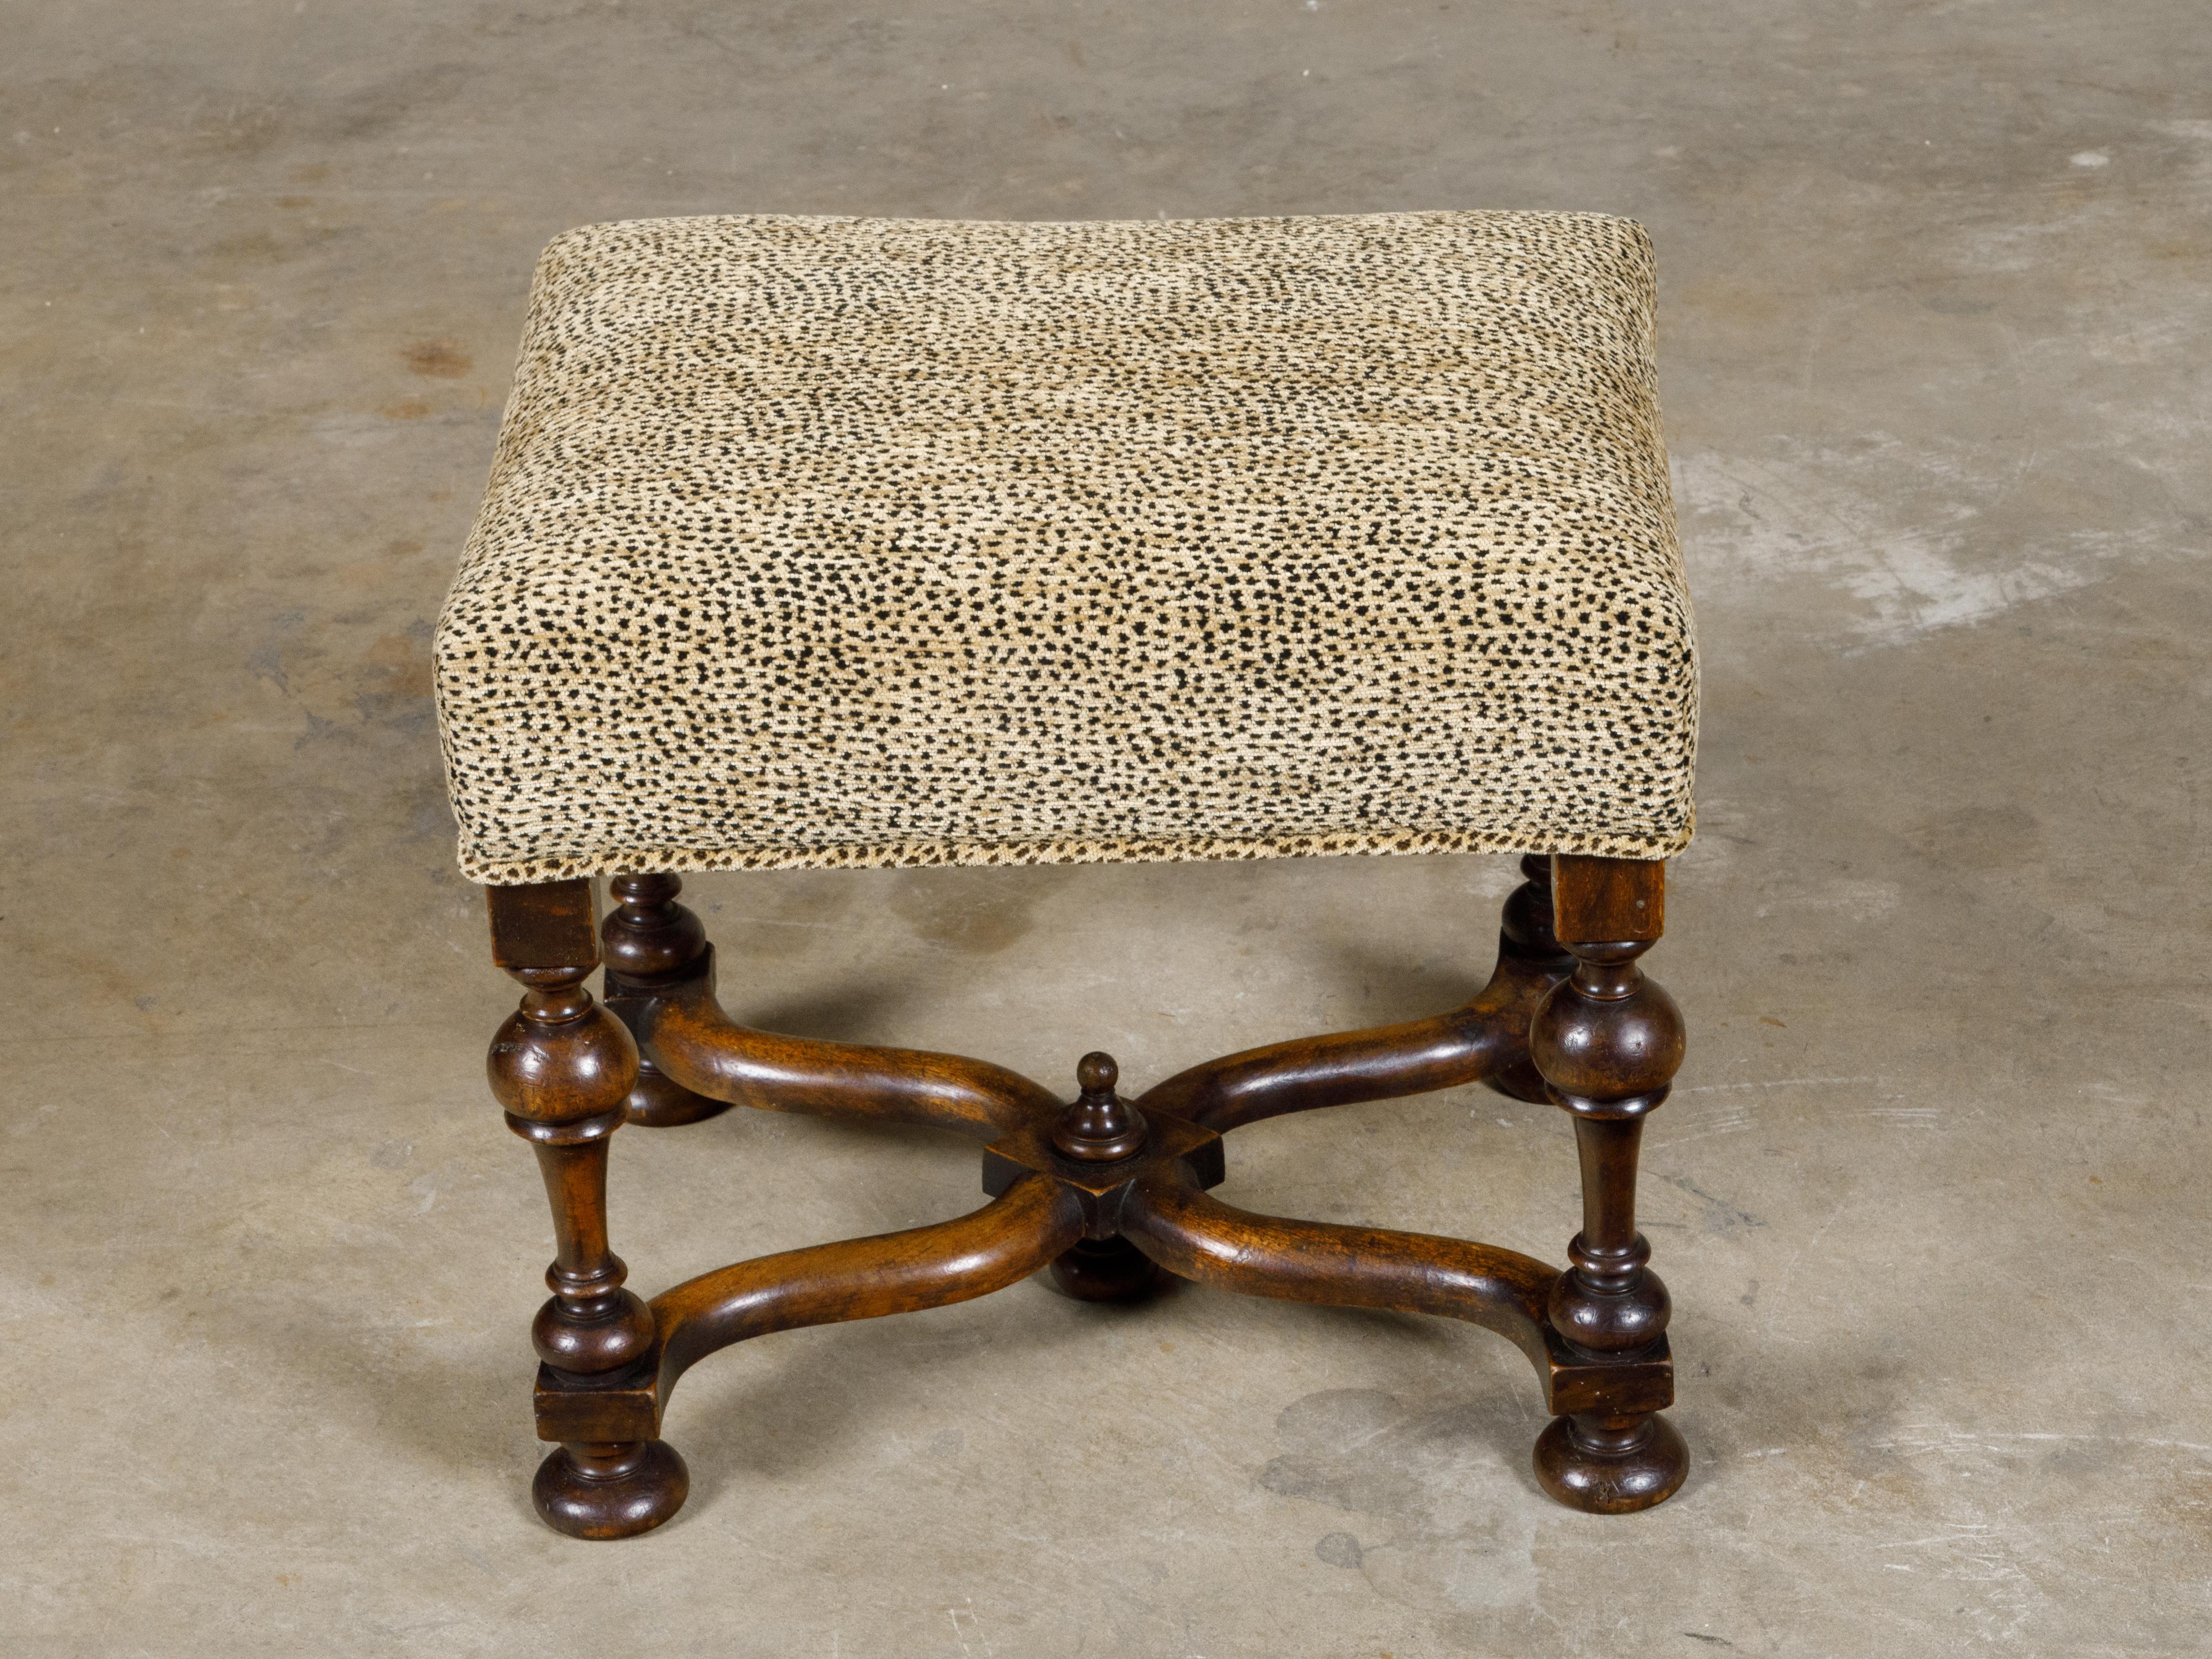 An English William and Mary style stool from circa 1900 with turned legs, curving X-Form stretcher, bun feet and upholstery. This stool, with its turned legs, curving X-Form stretcher with a central finial, bun feet, and plush upholstery, is a